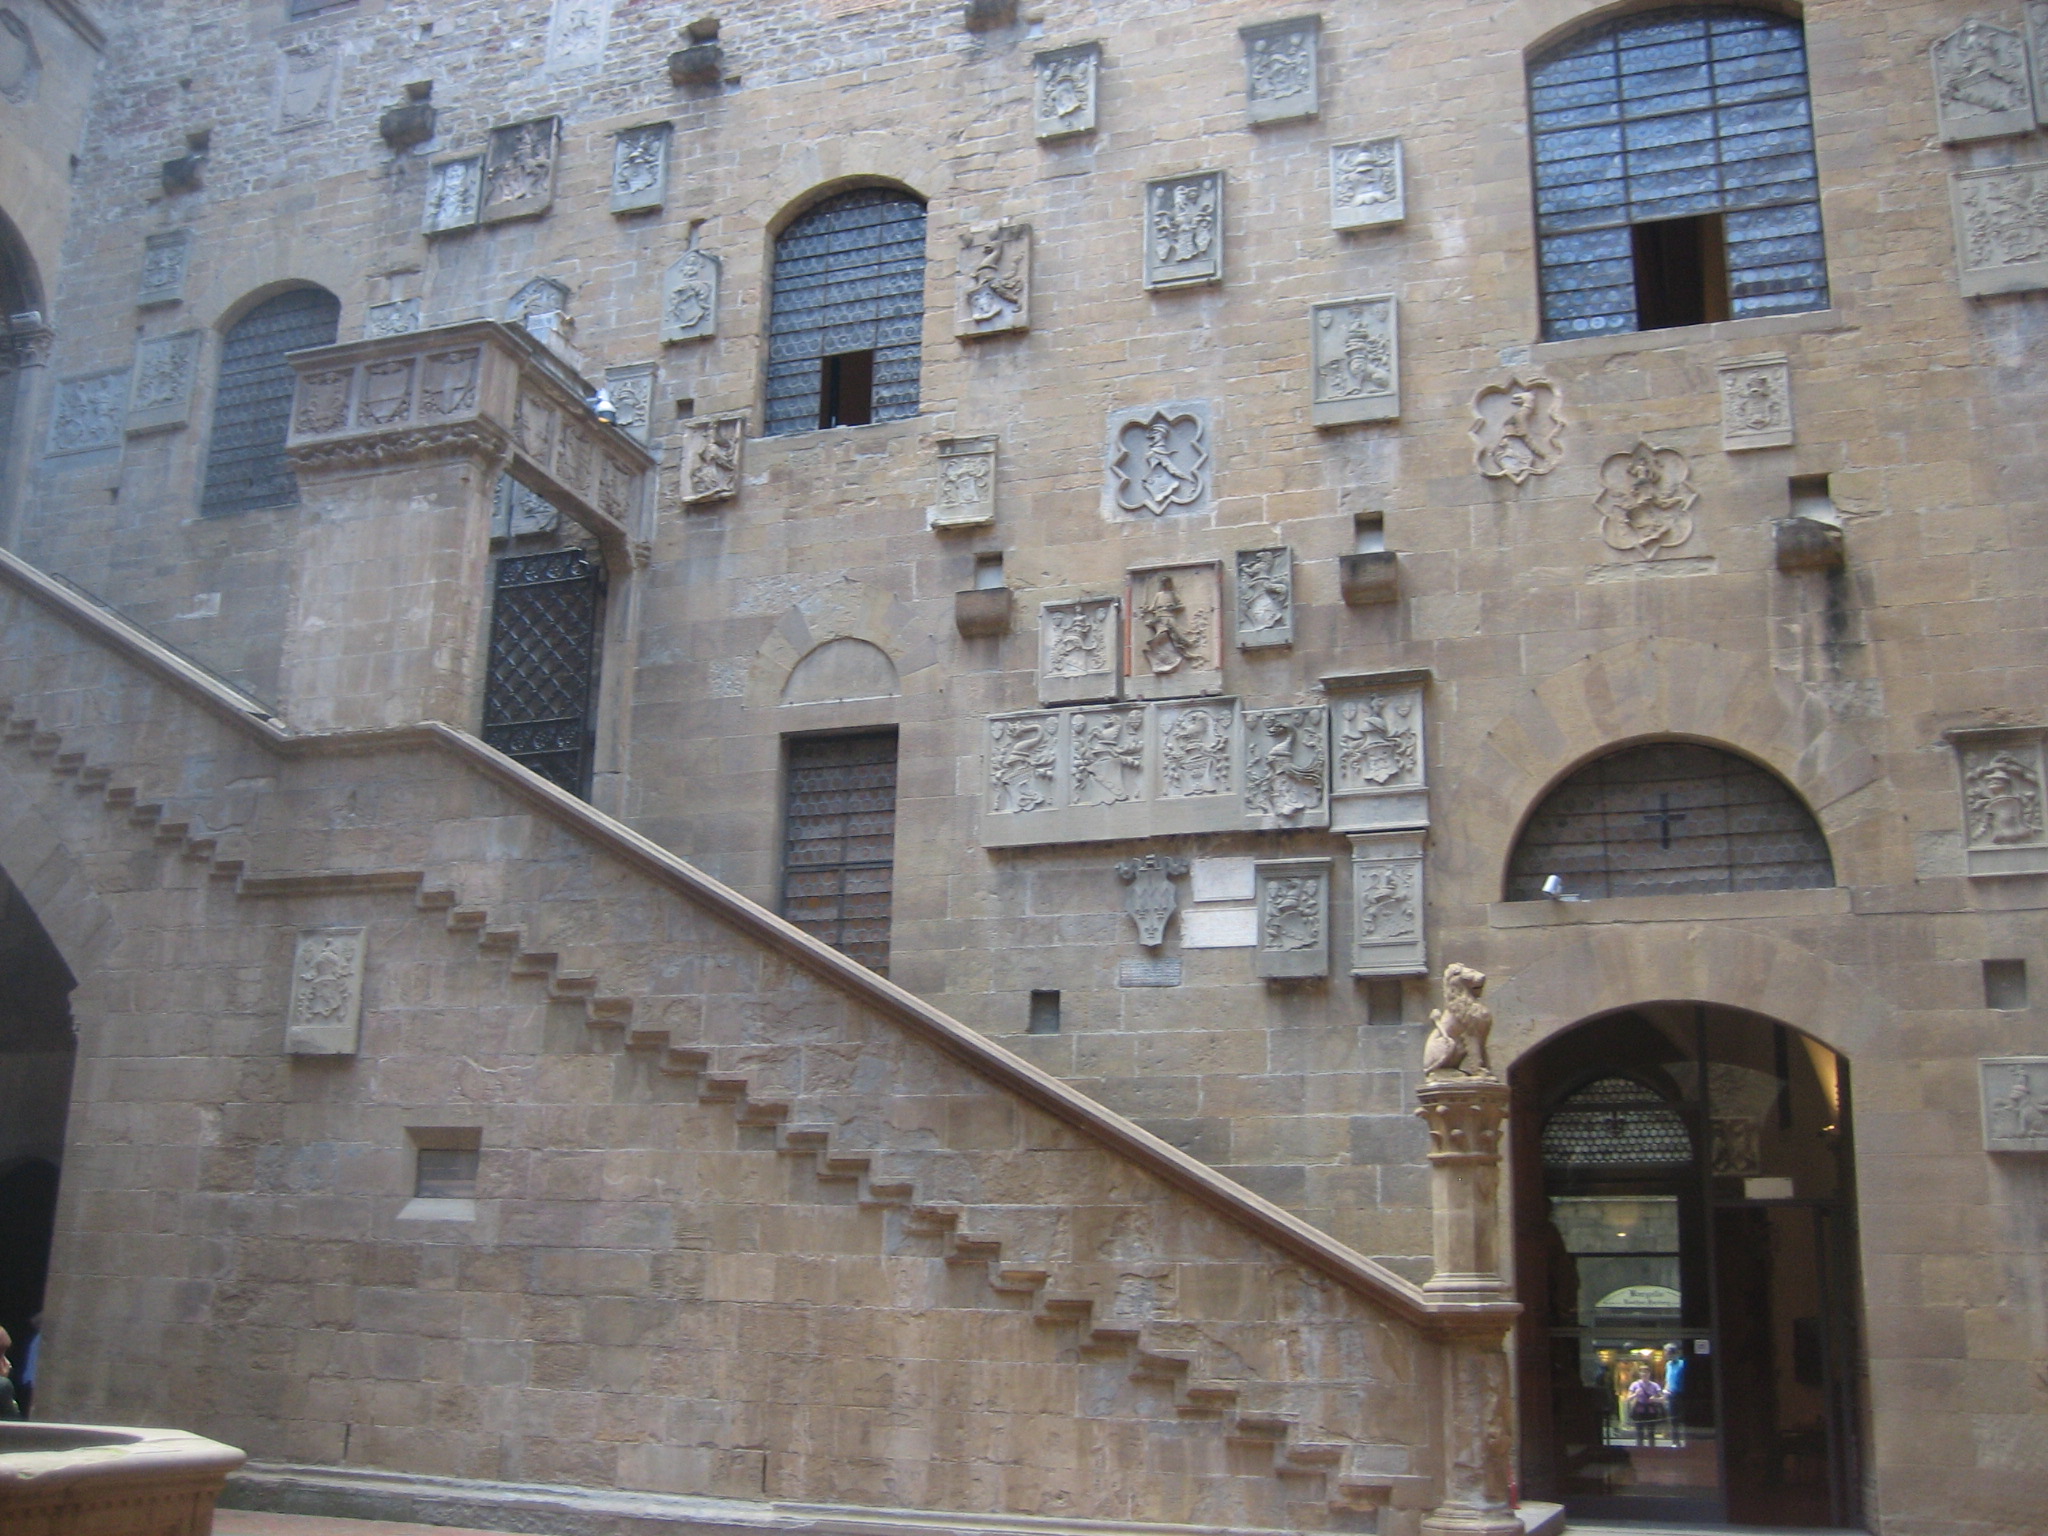 This photograph details the interior courtyard of The Bargello Museum. The stairwell leads to the second floor gallery which includes the display of Verrocchio's David and Donatello's David.